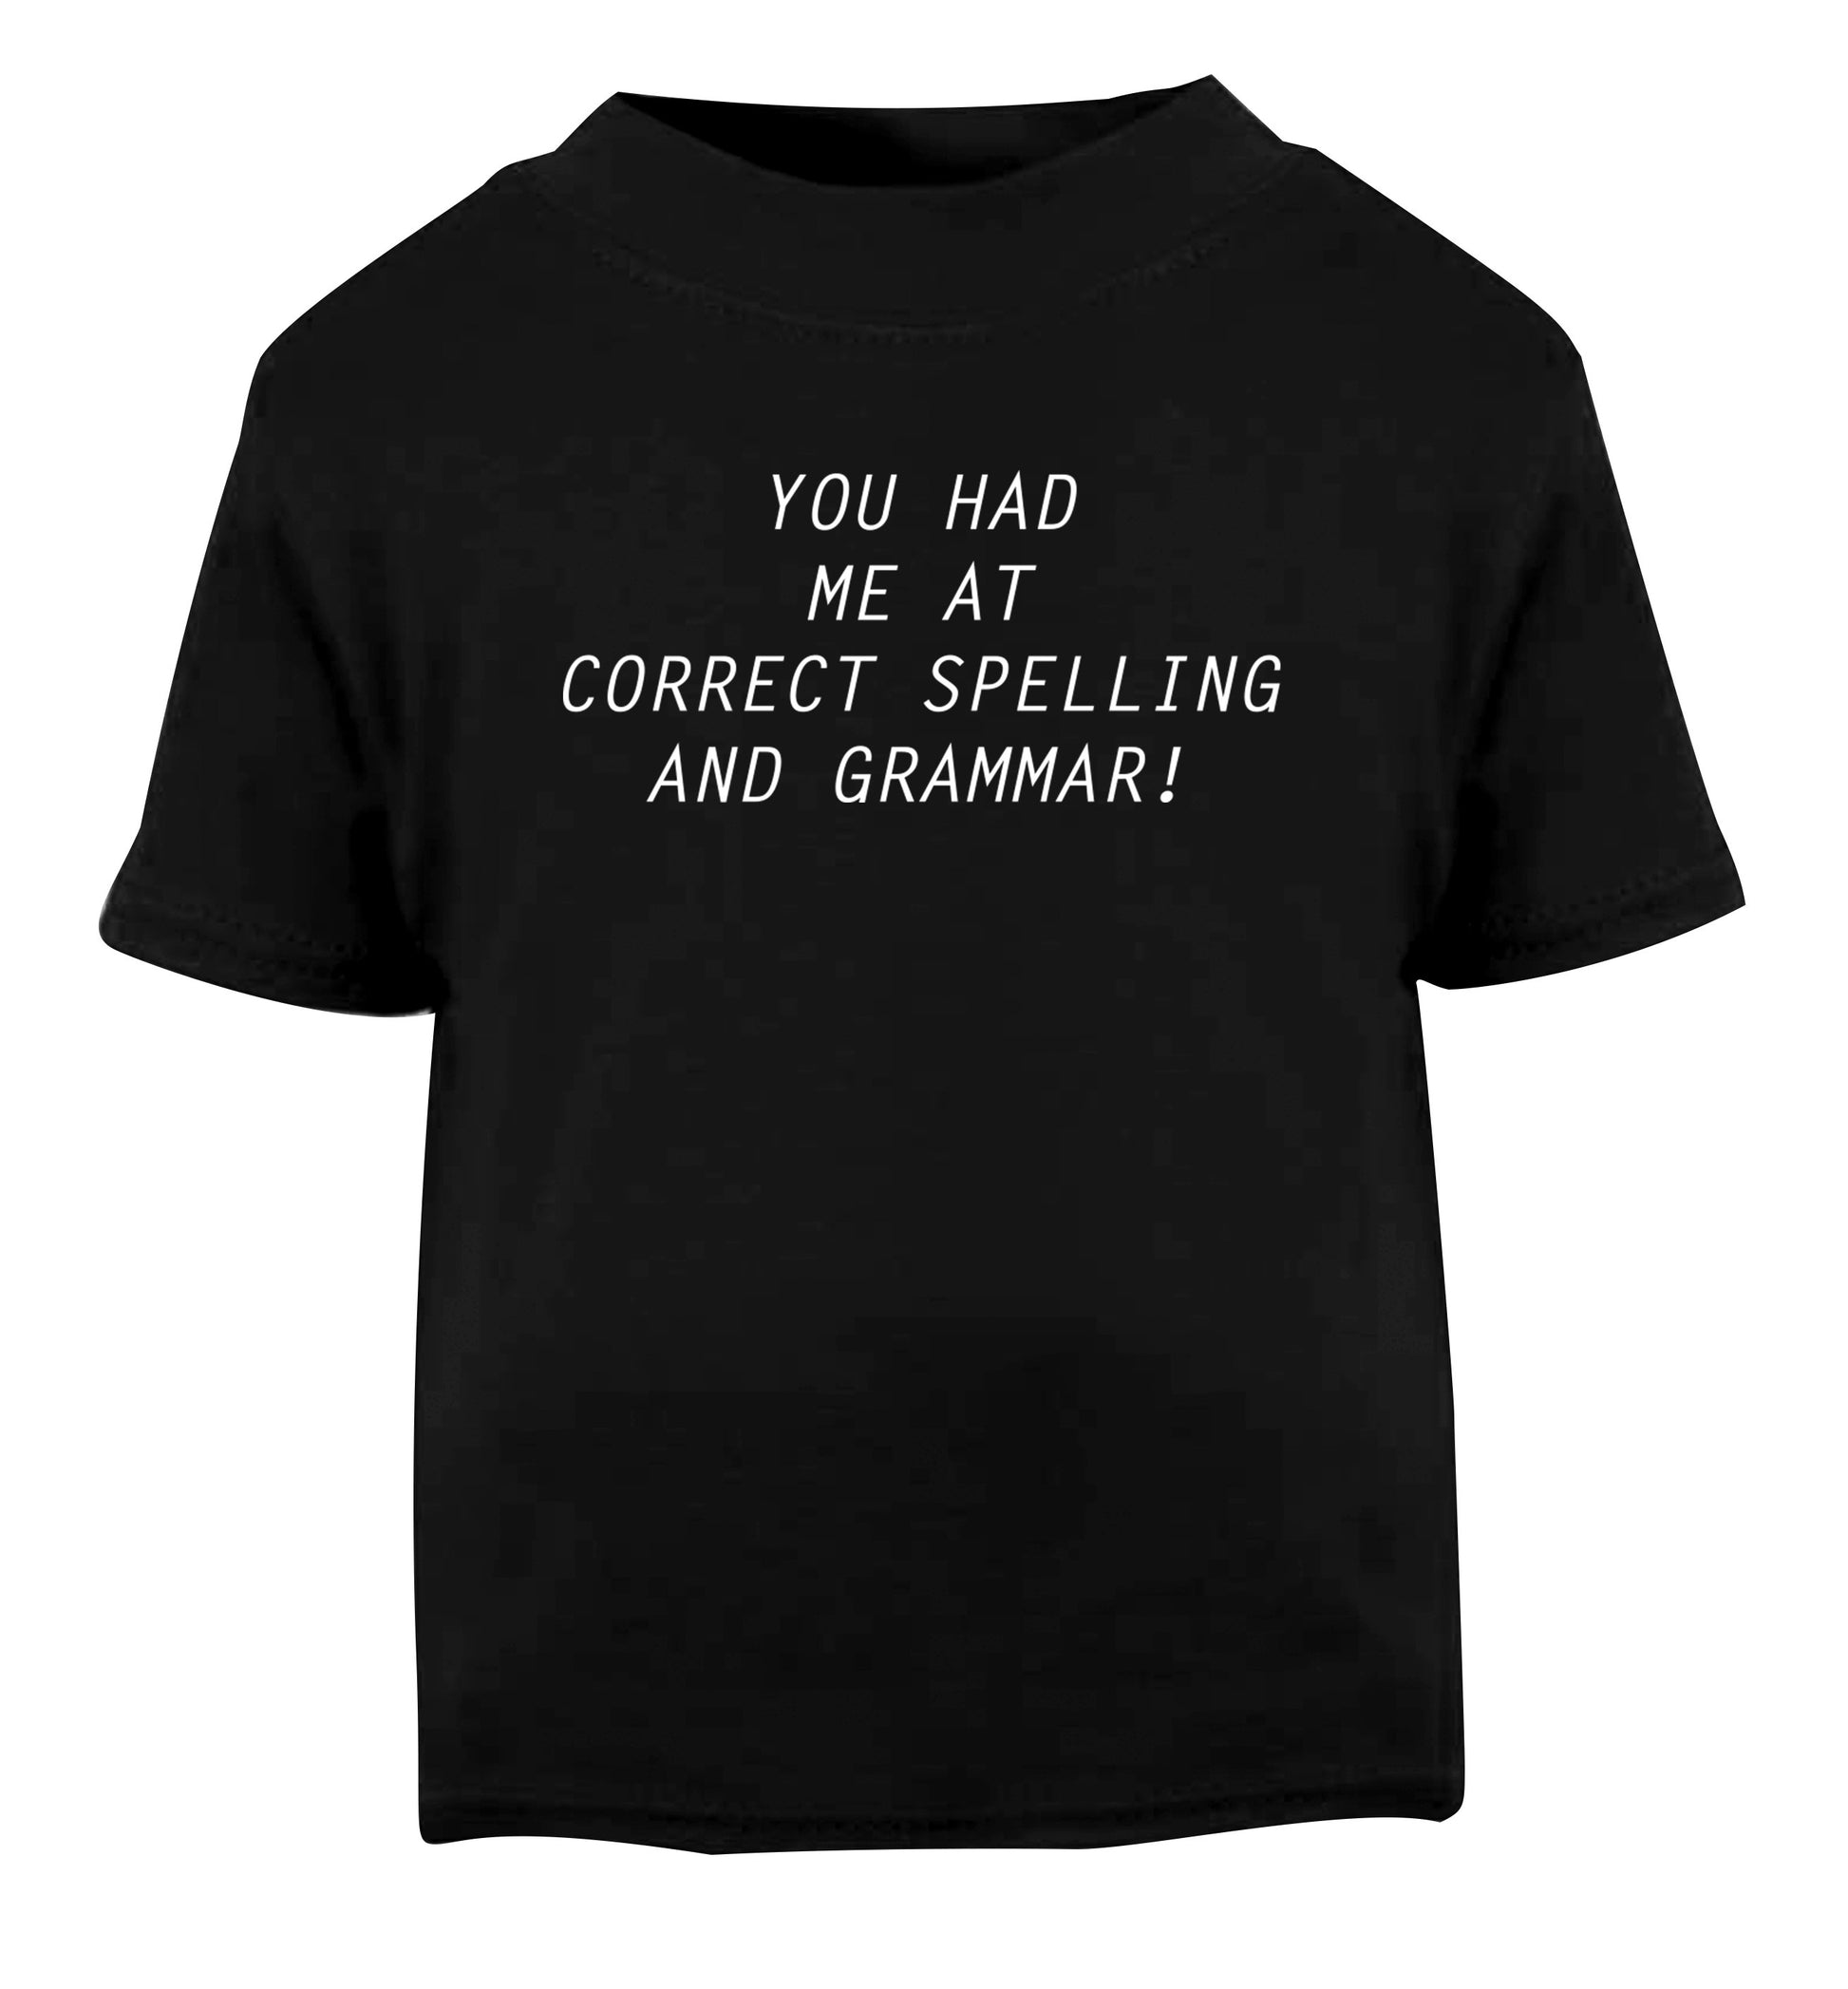 You had me at correct spelling and grammar Black Baby Toddler Tshirt 2 years